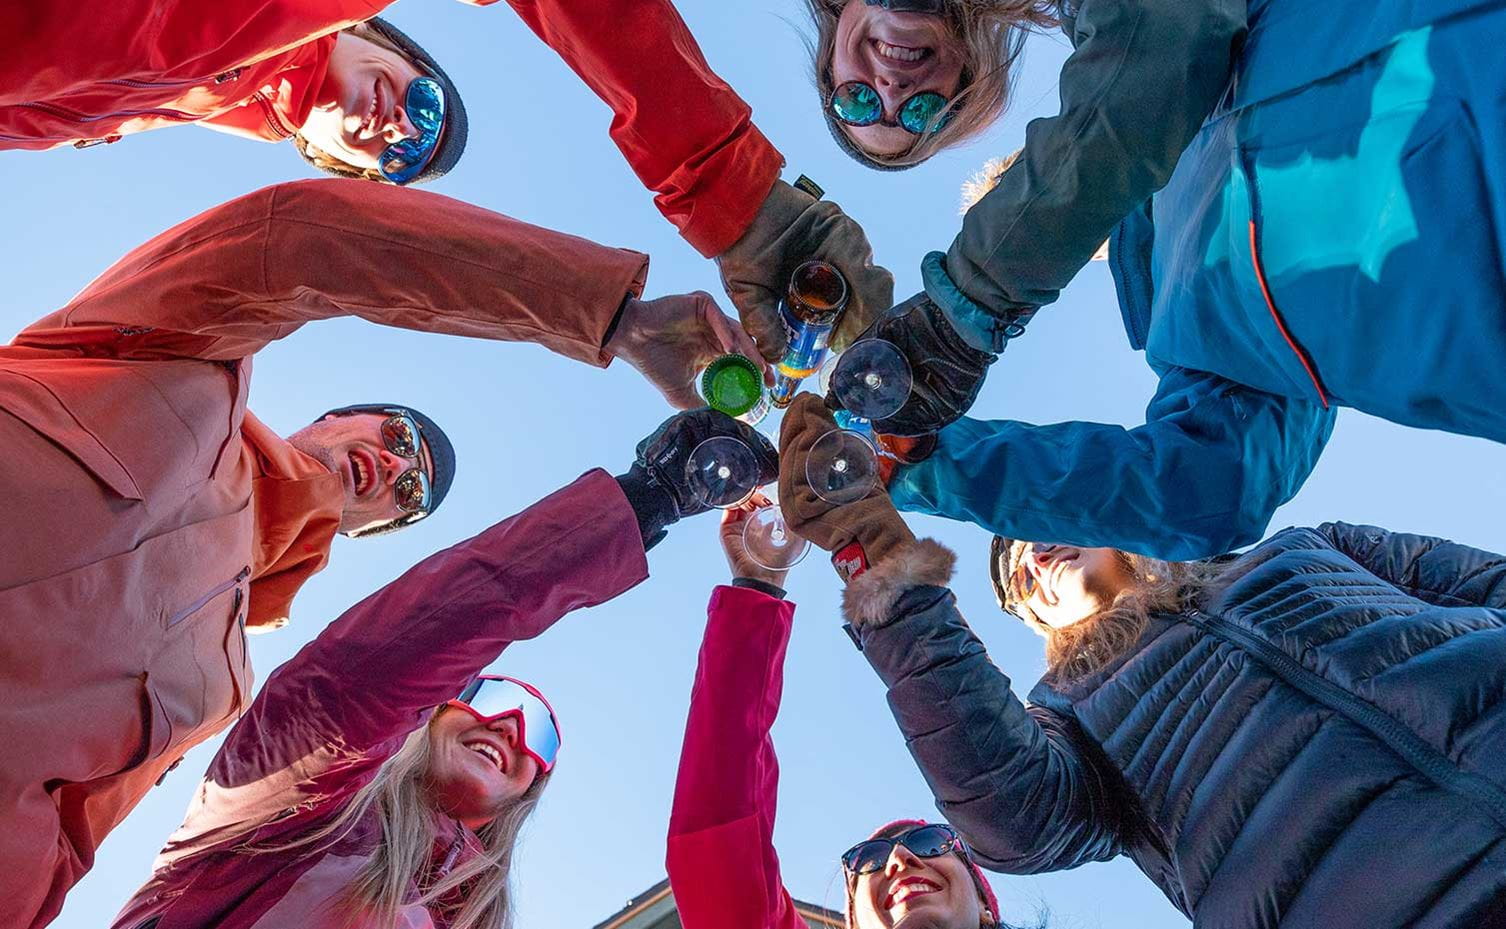 Groups toasting at Aspen Snowmass